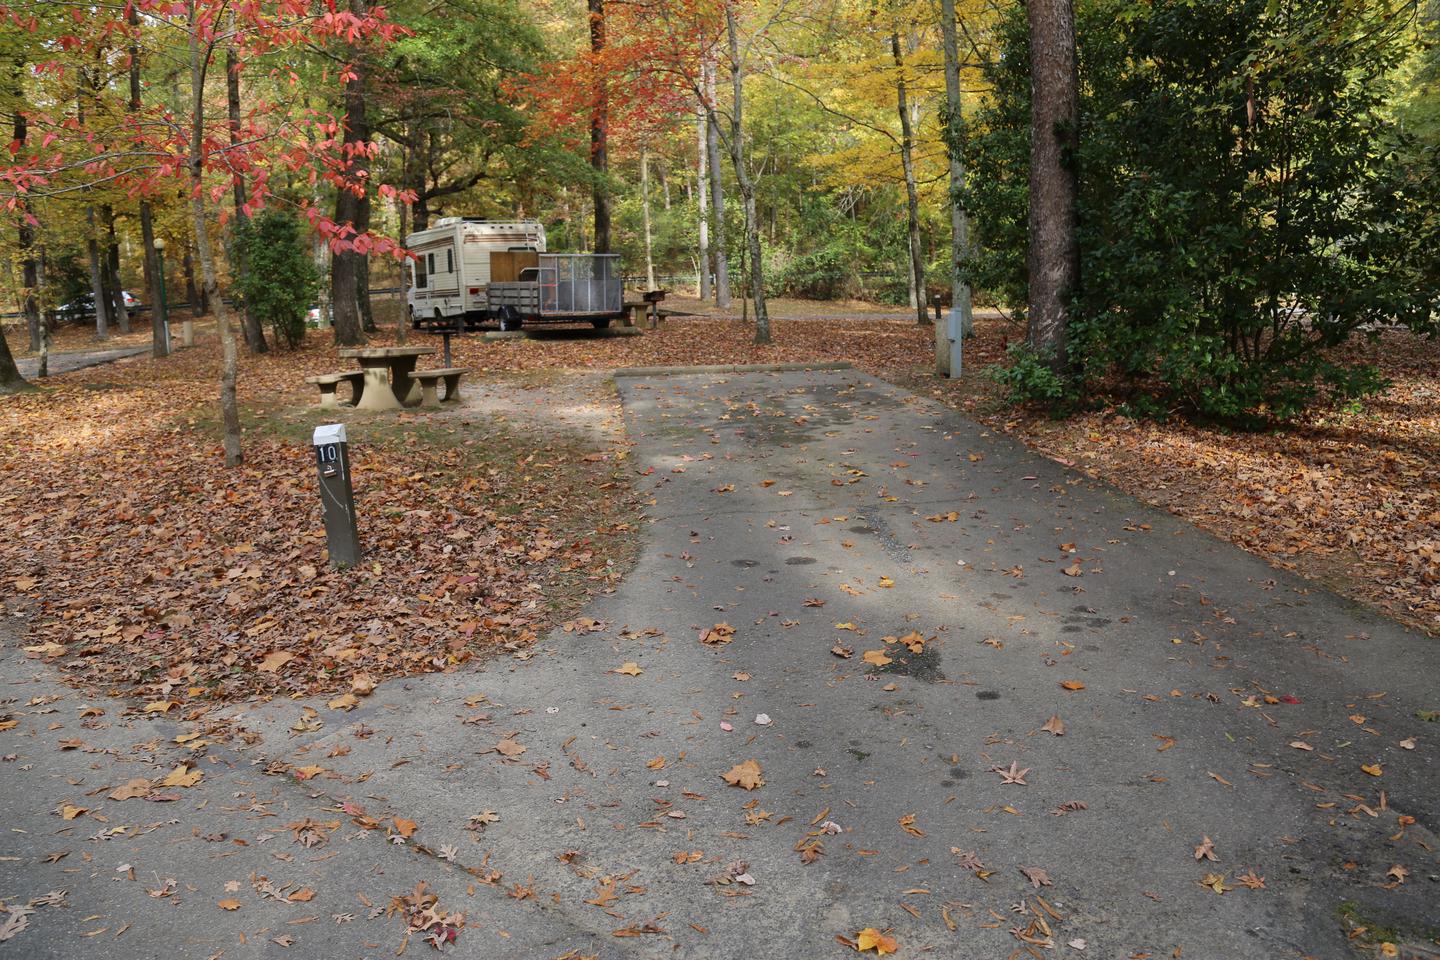 Paved campsite with picnic table and leaves on the ground surrounded by treesCampsite 10